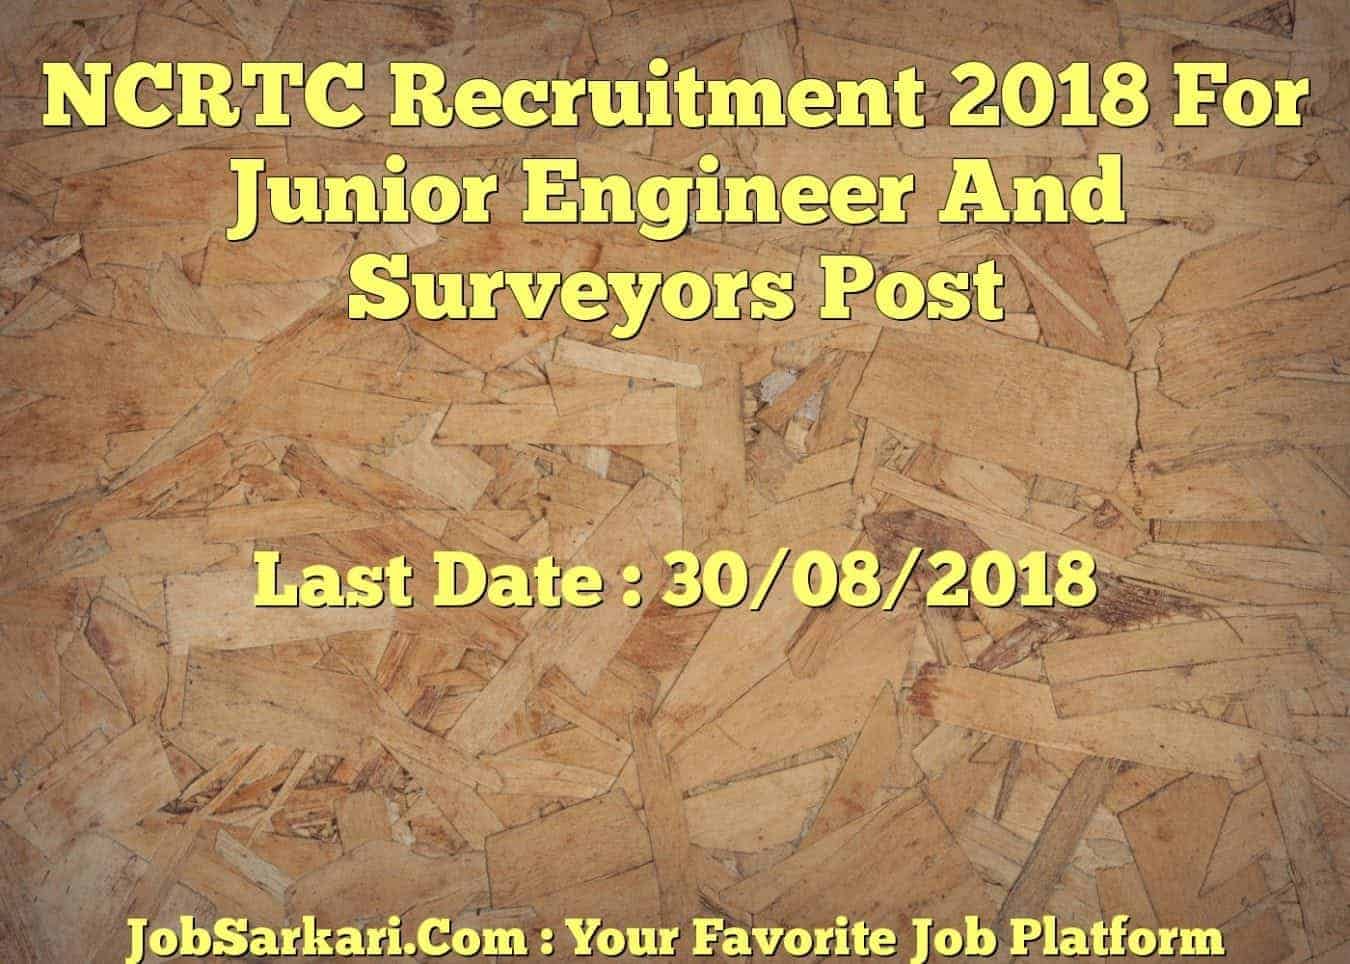 NCRTC Recruitment 2018 For Junior Engineer And Surveyors Post